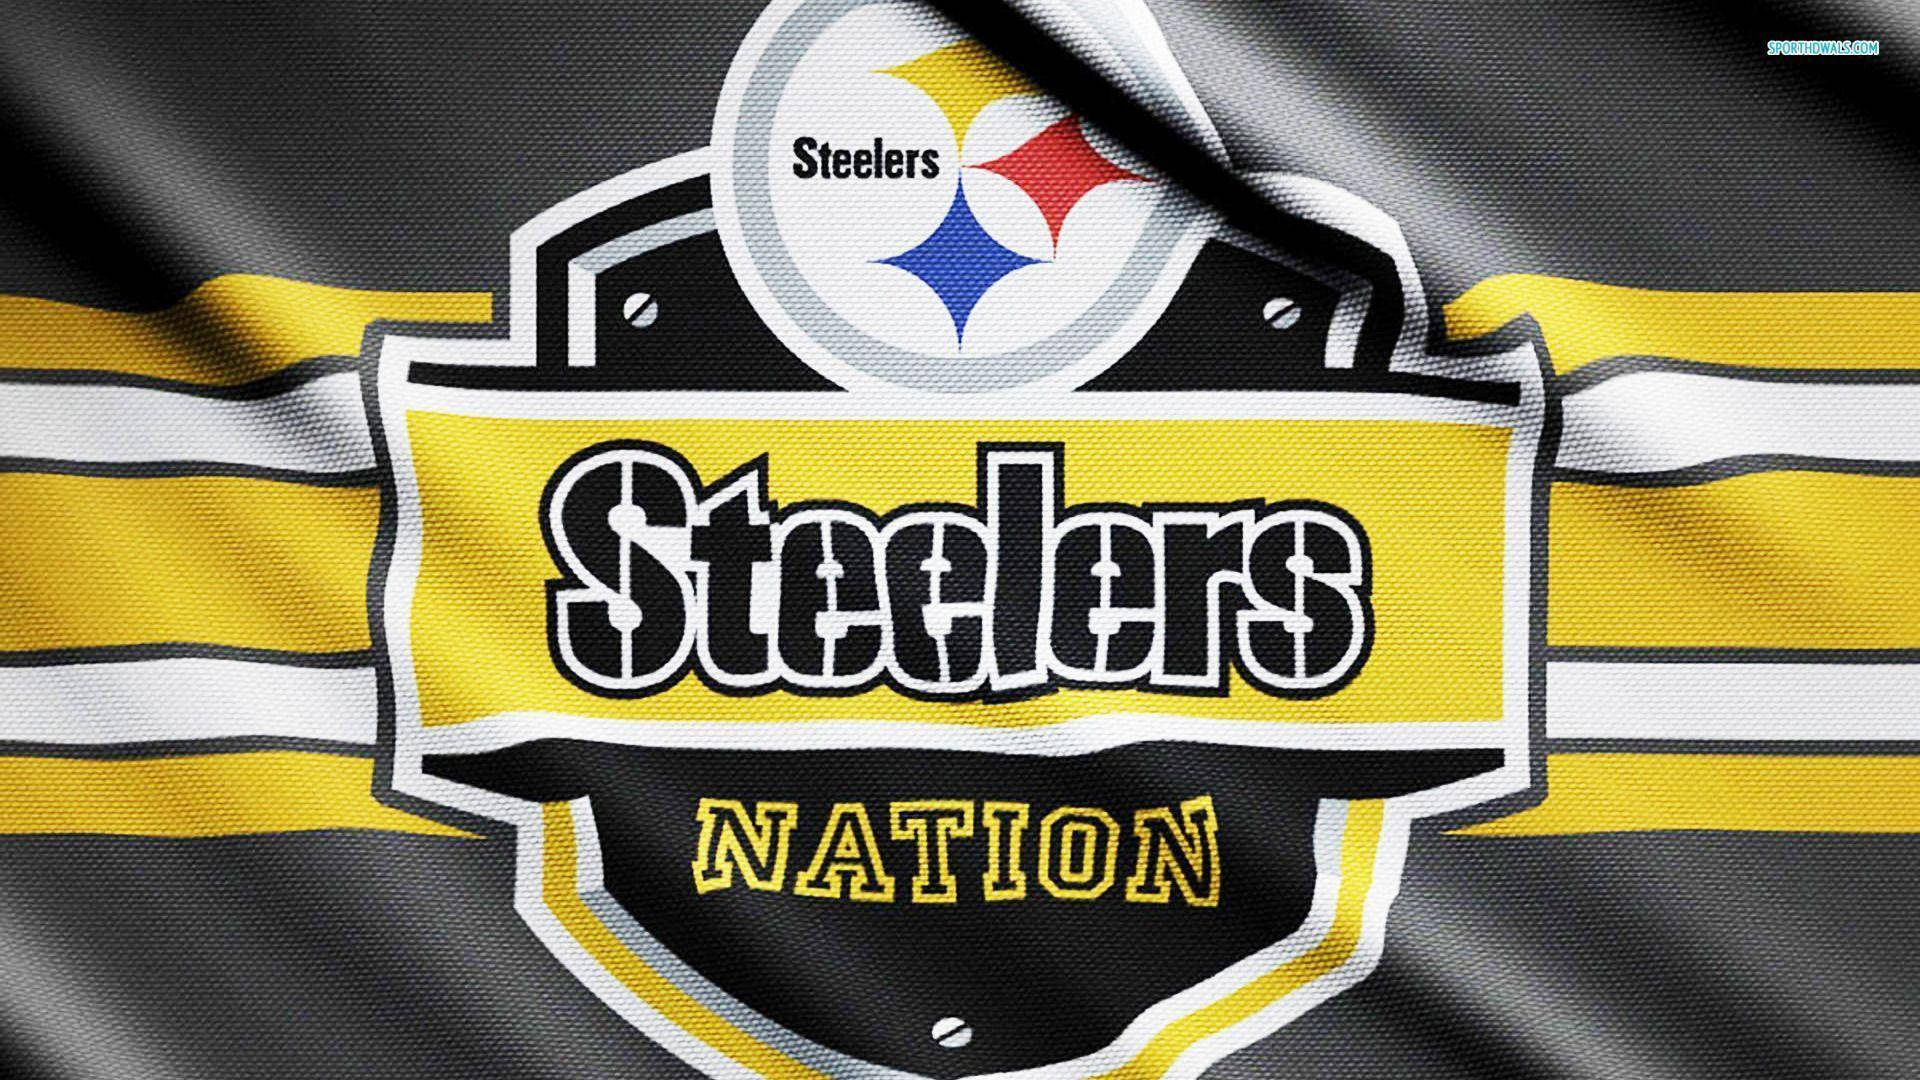 Show Your Love For The Steelers! Wallpaper